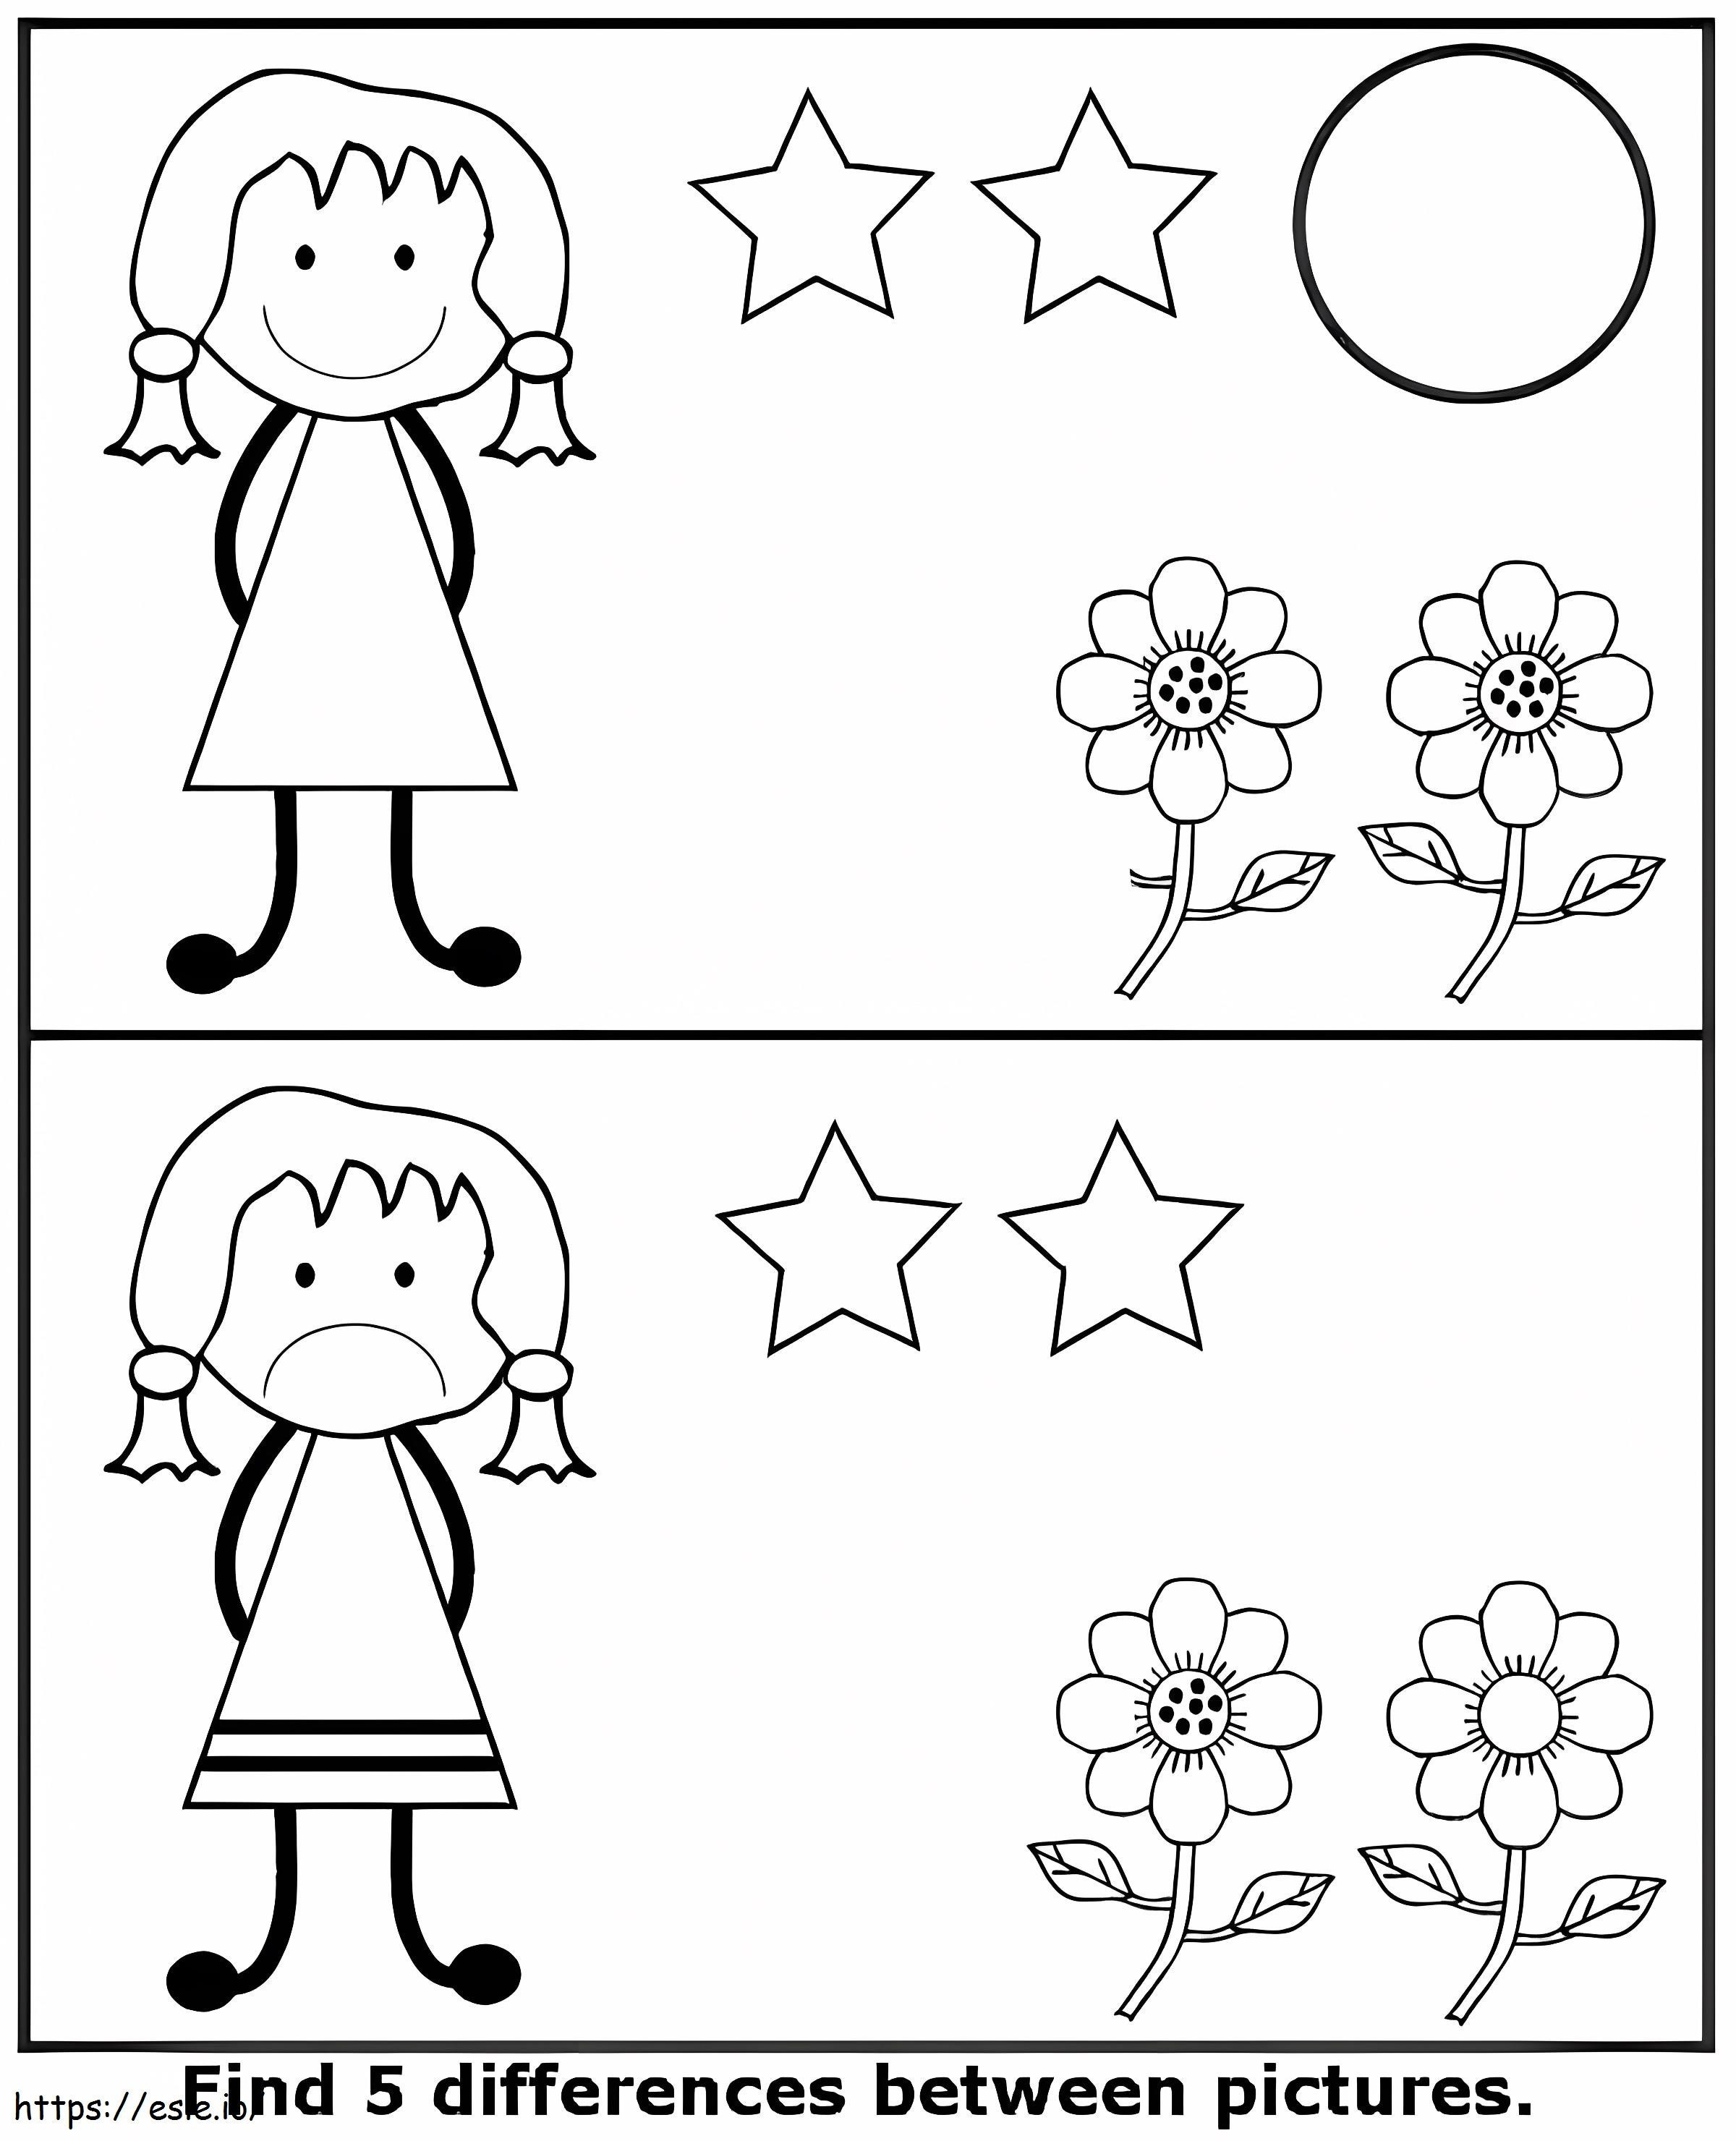 Free Printable Find 5 Differences coloring page